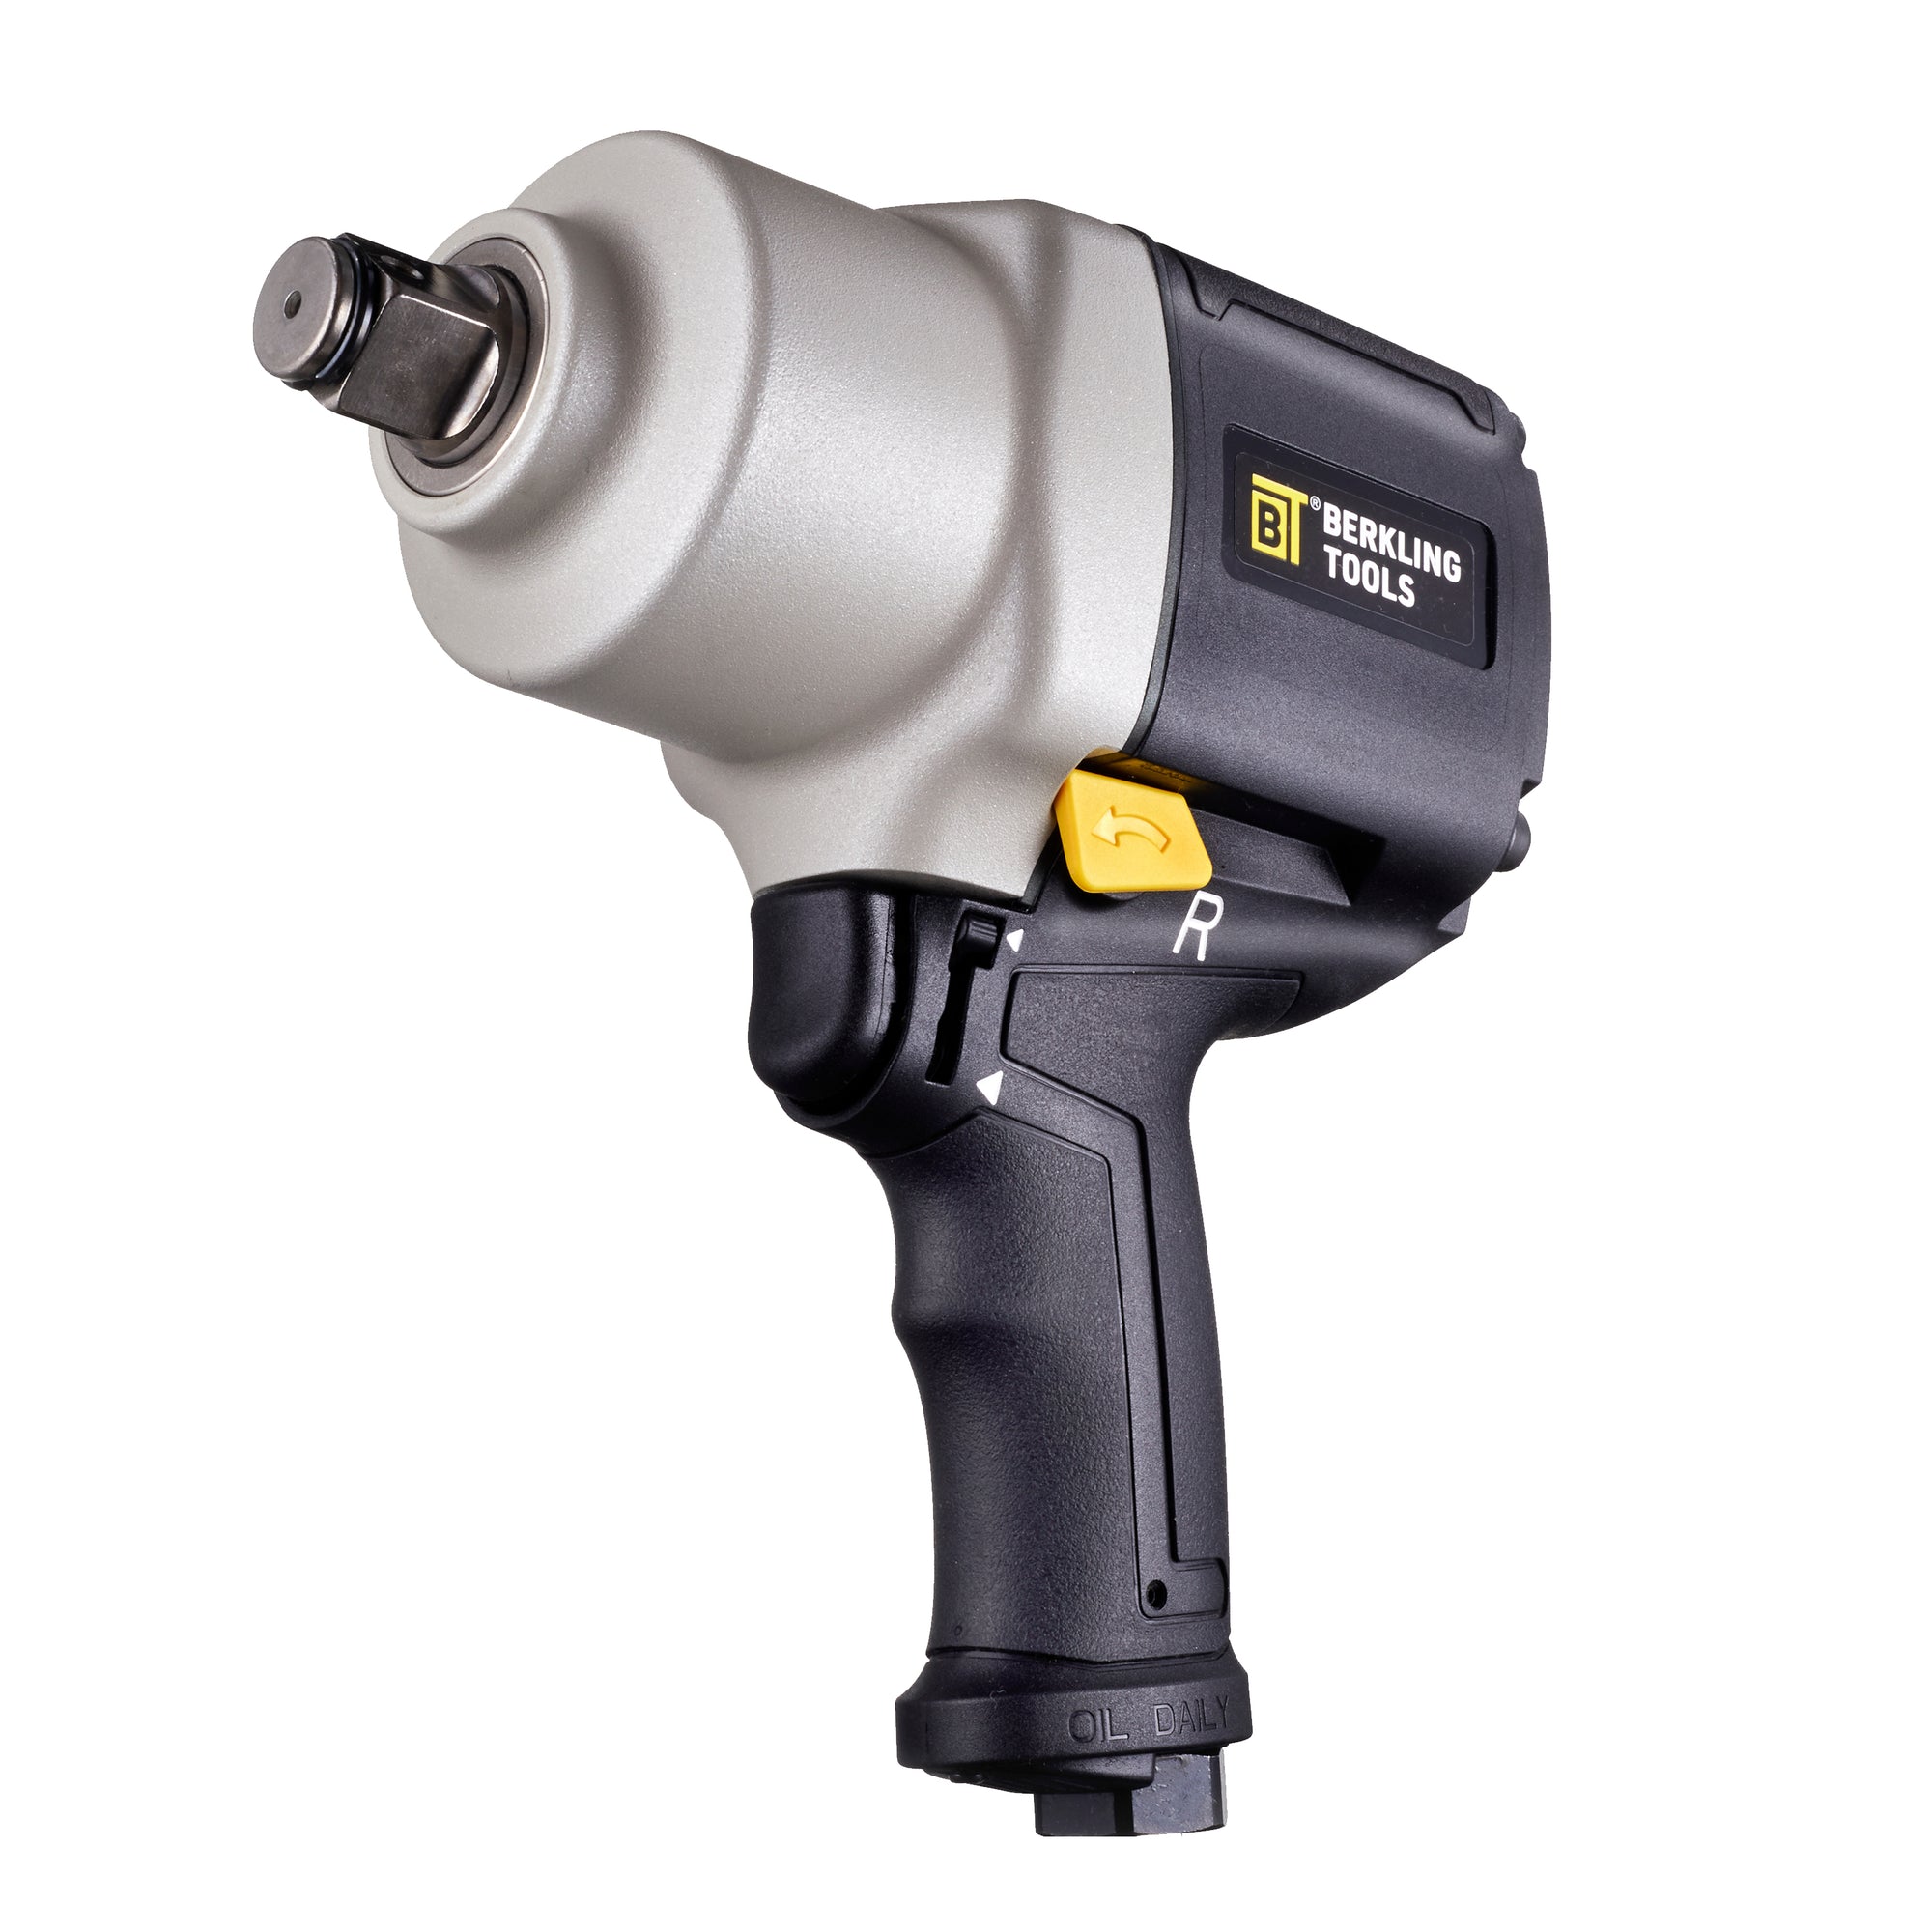 2790T 3/4" EXTREME EDITION Heavy Duty Twin Hammer Pneumatic Impact Wrench - Berkling Tools